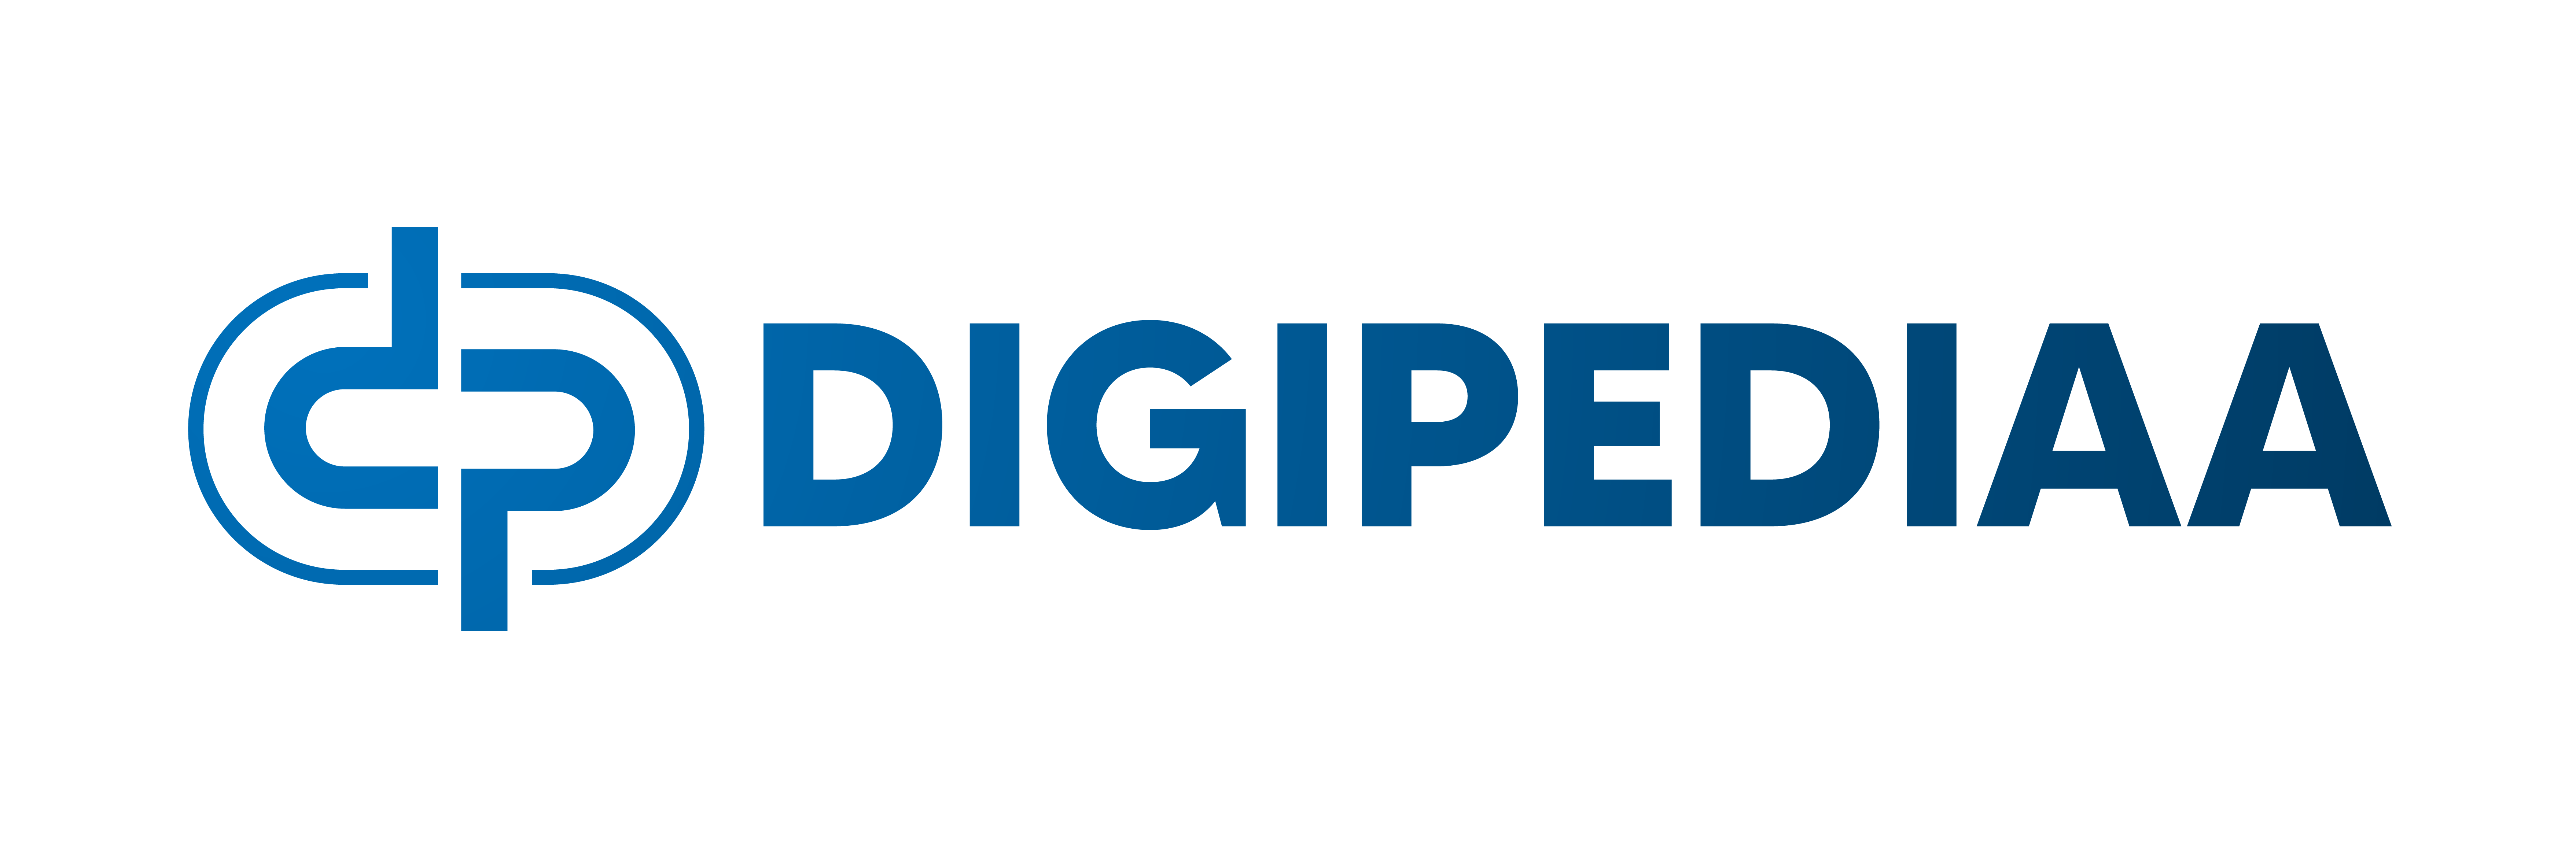 cropped-Digipediaa-logo-Liner-1-white-BG.png